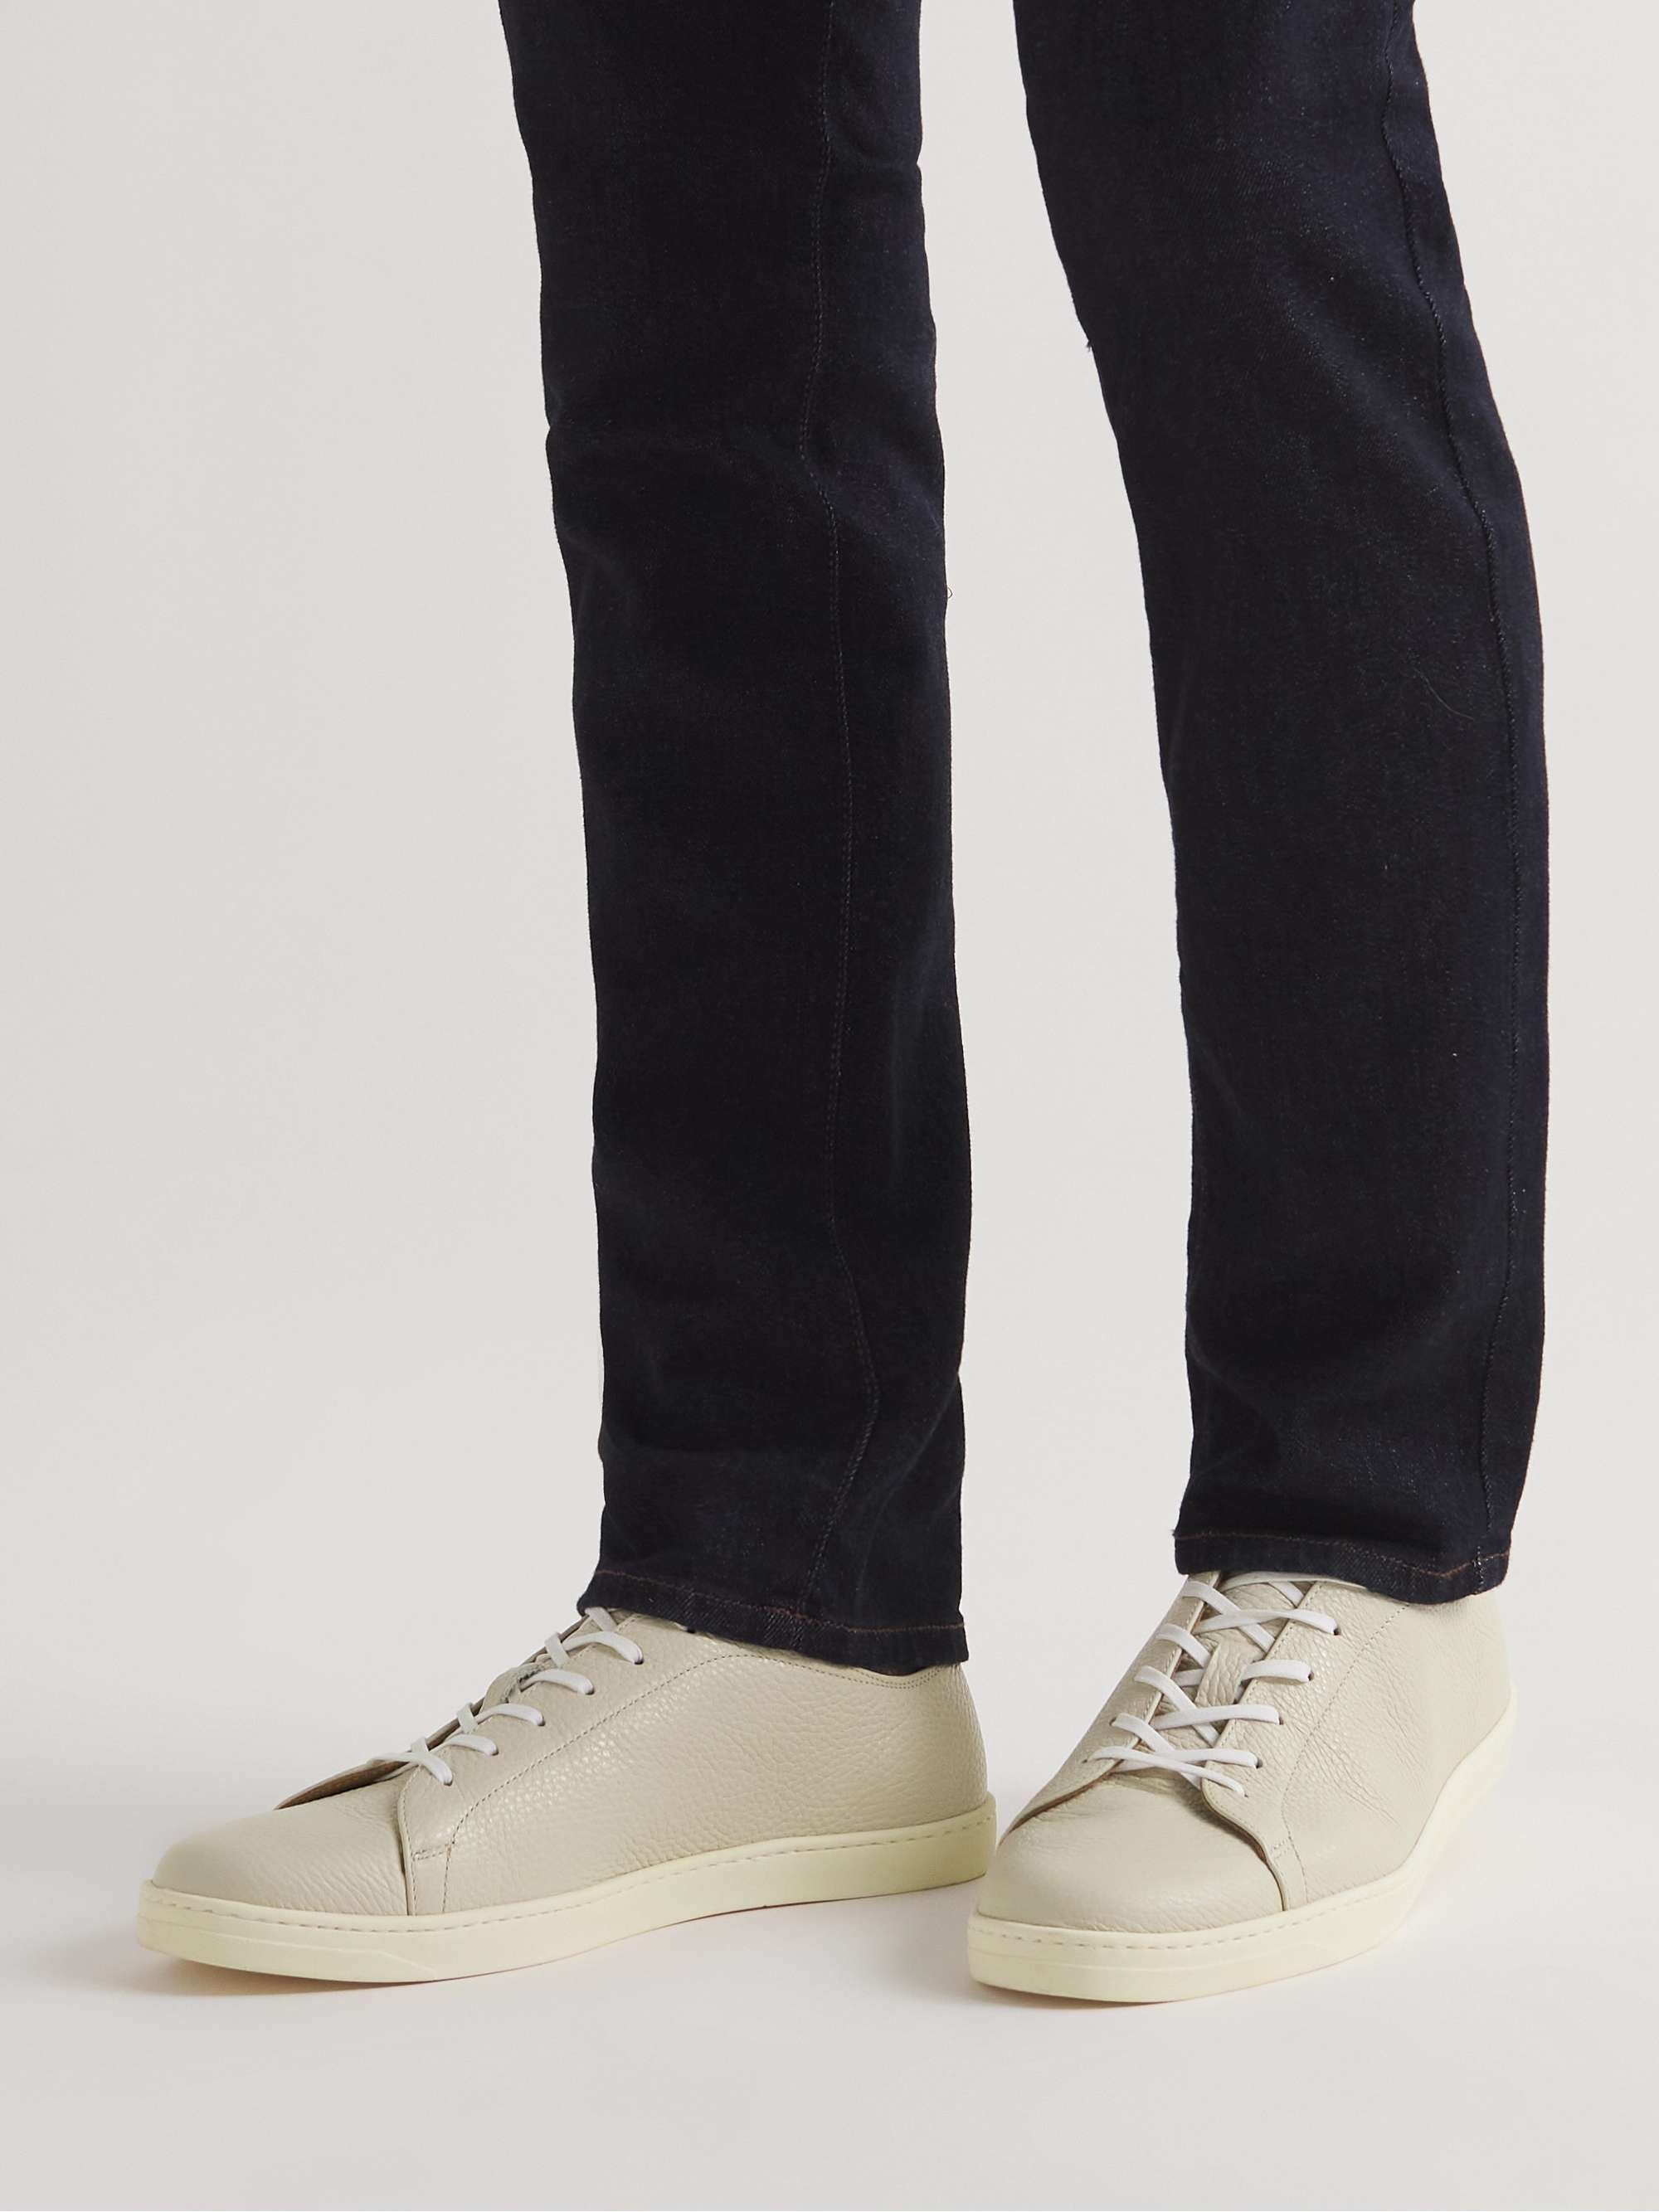 GEORGE CLEVERLEY Full-Grain Leather Sneakers for Men | MR PORTER